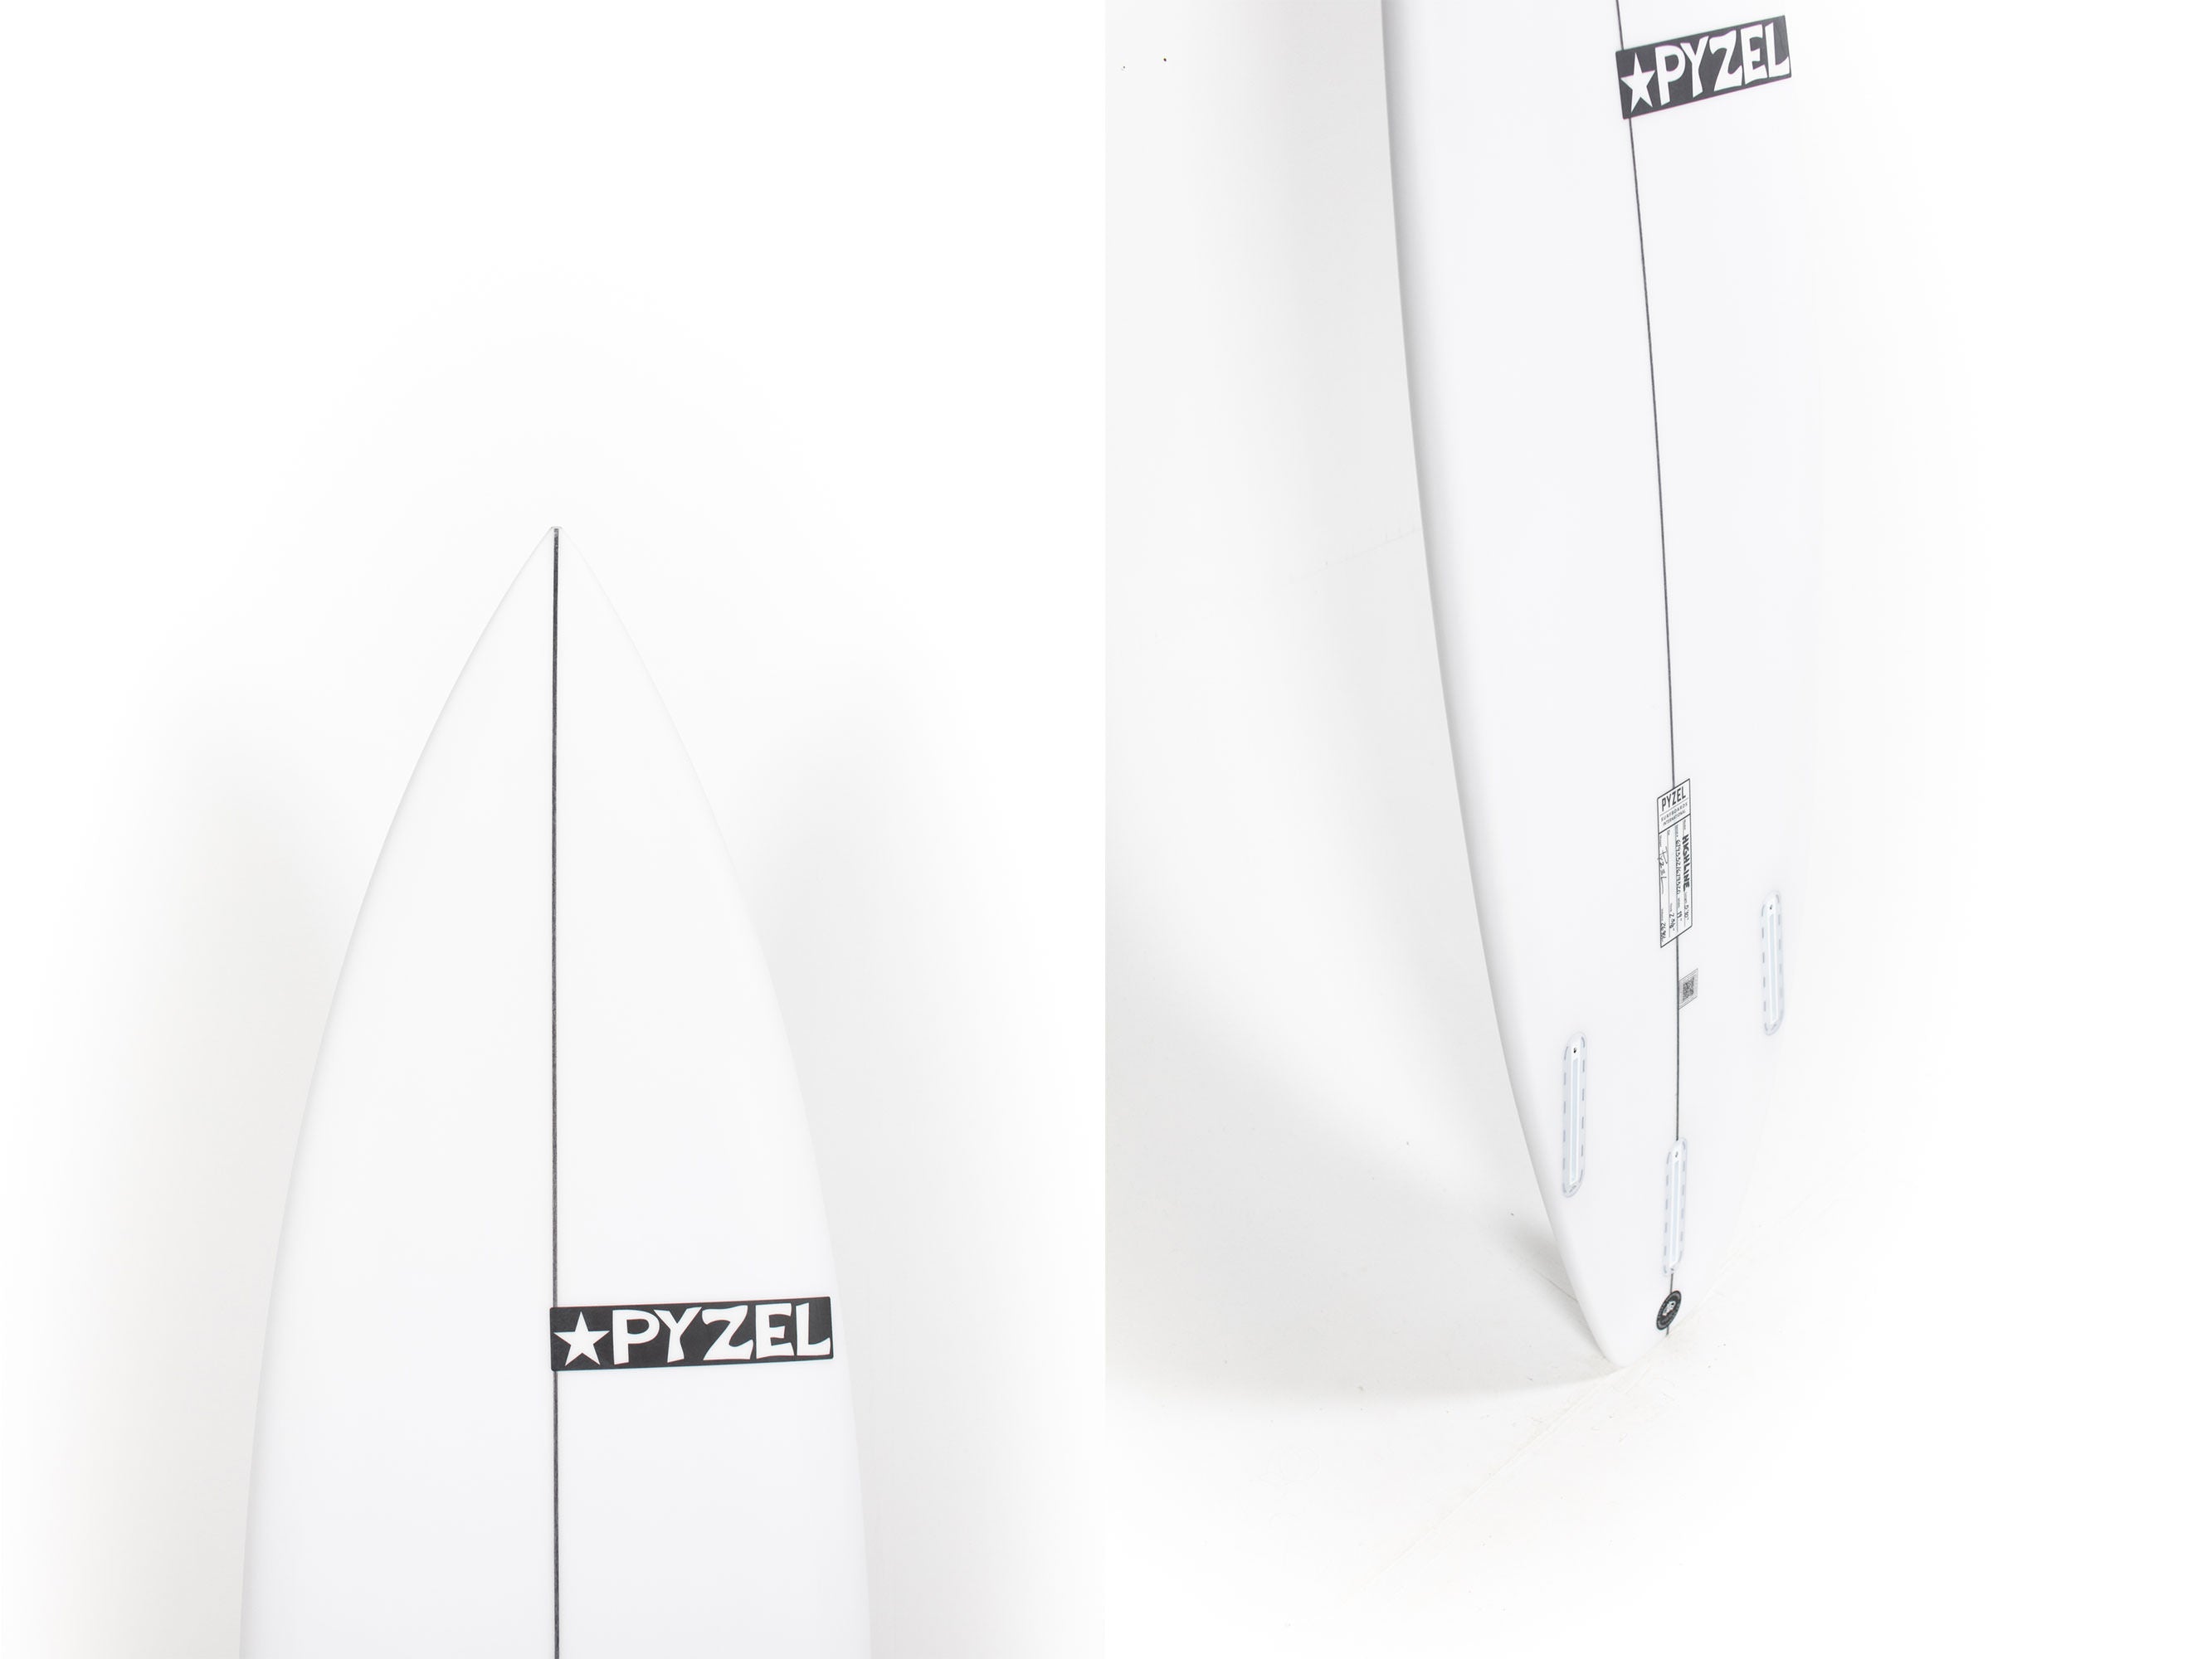 Pyzel Surfboards - HIGH LINE - 5'10" x 19 x 2 3/8 - 26,9L - Ref: 679320